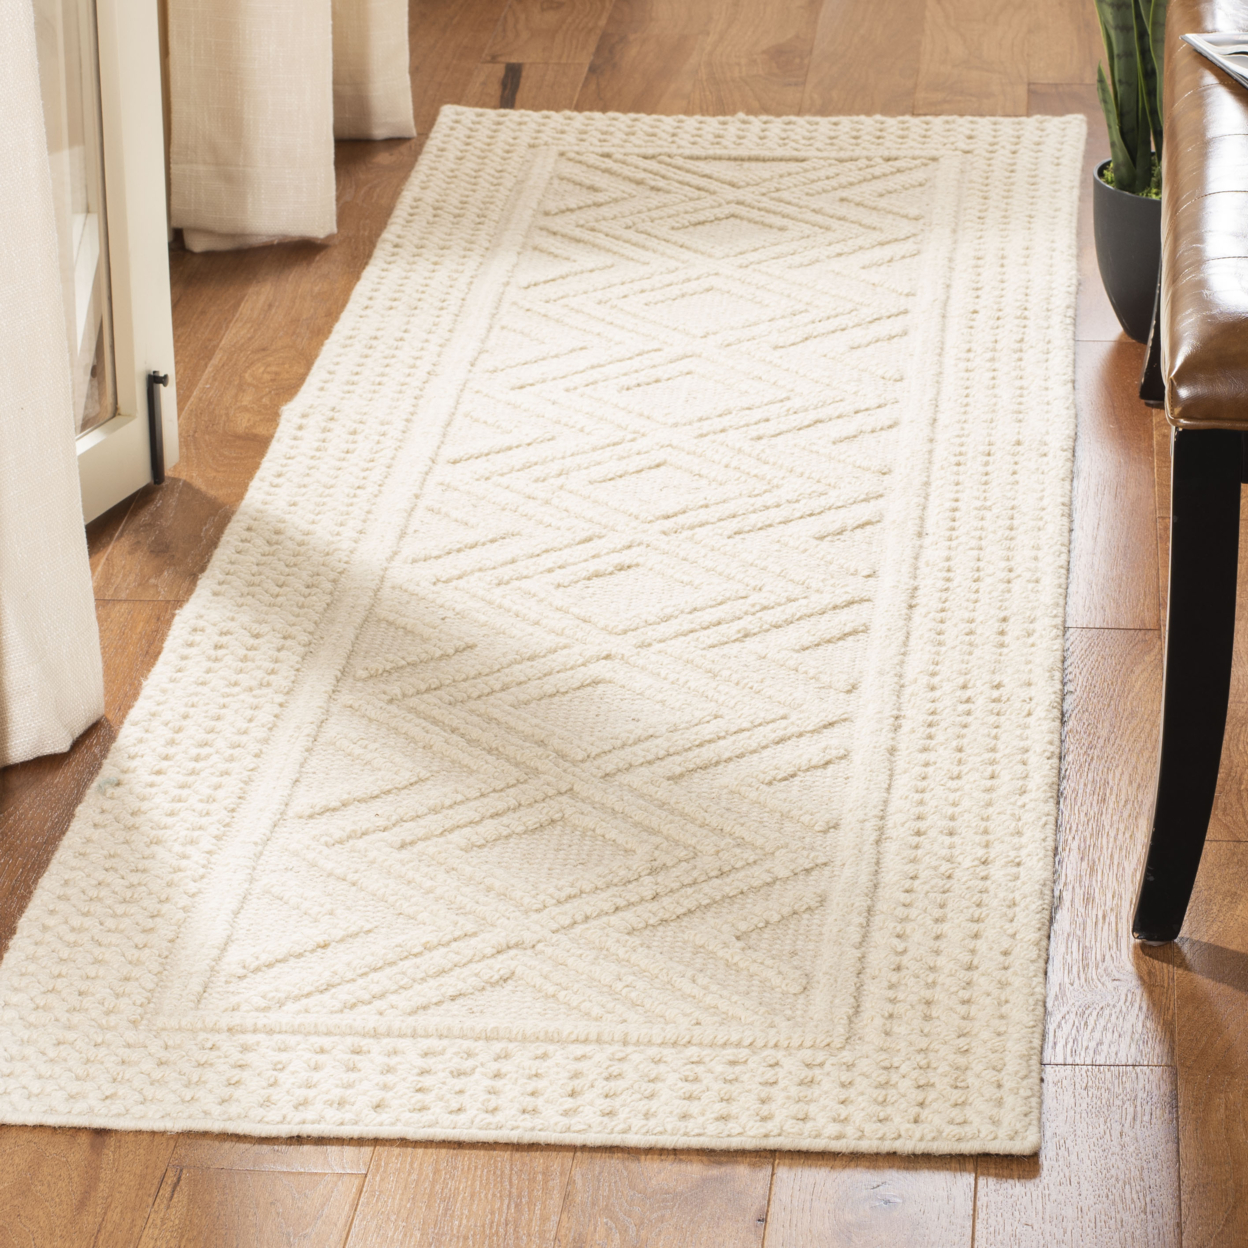 SAFAVIEH Vermont Collection VRM212A Handwoven Ivory Rug - 6 X 9